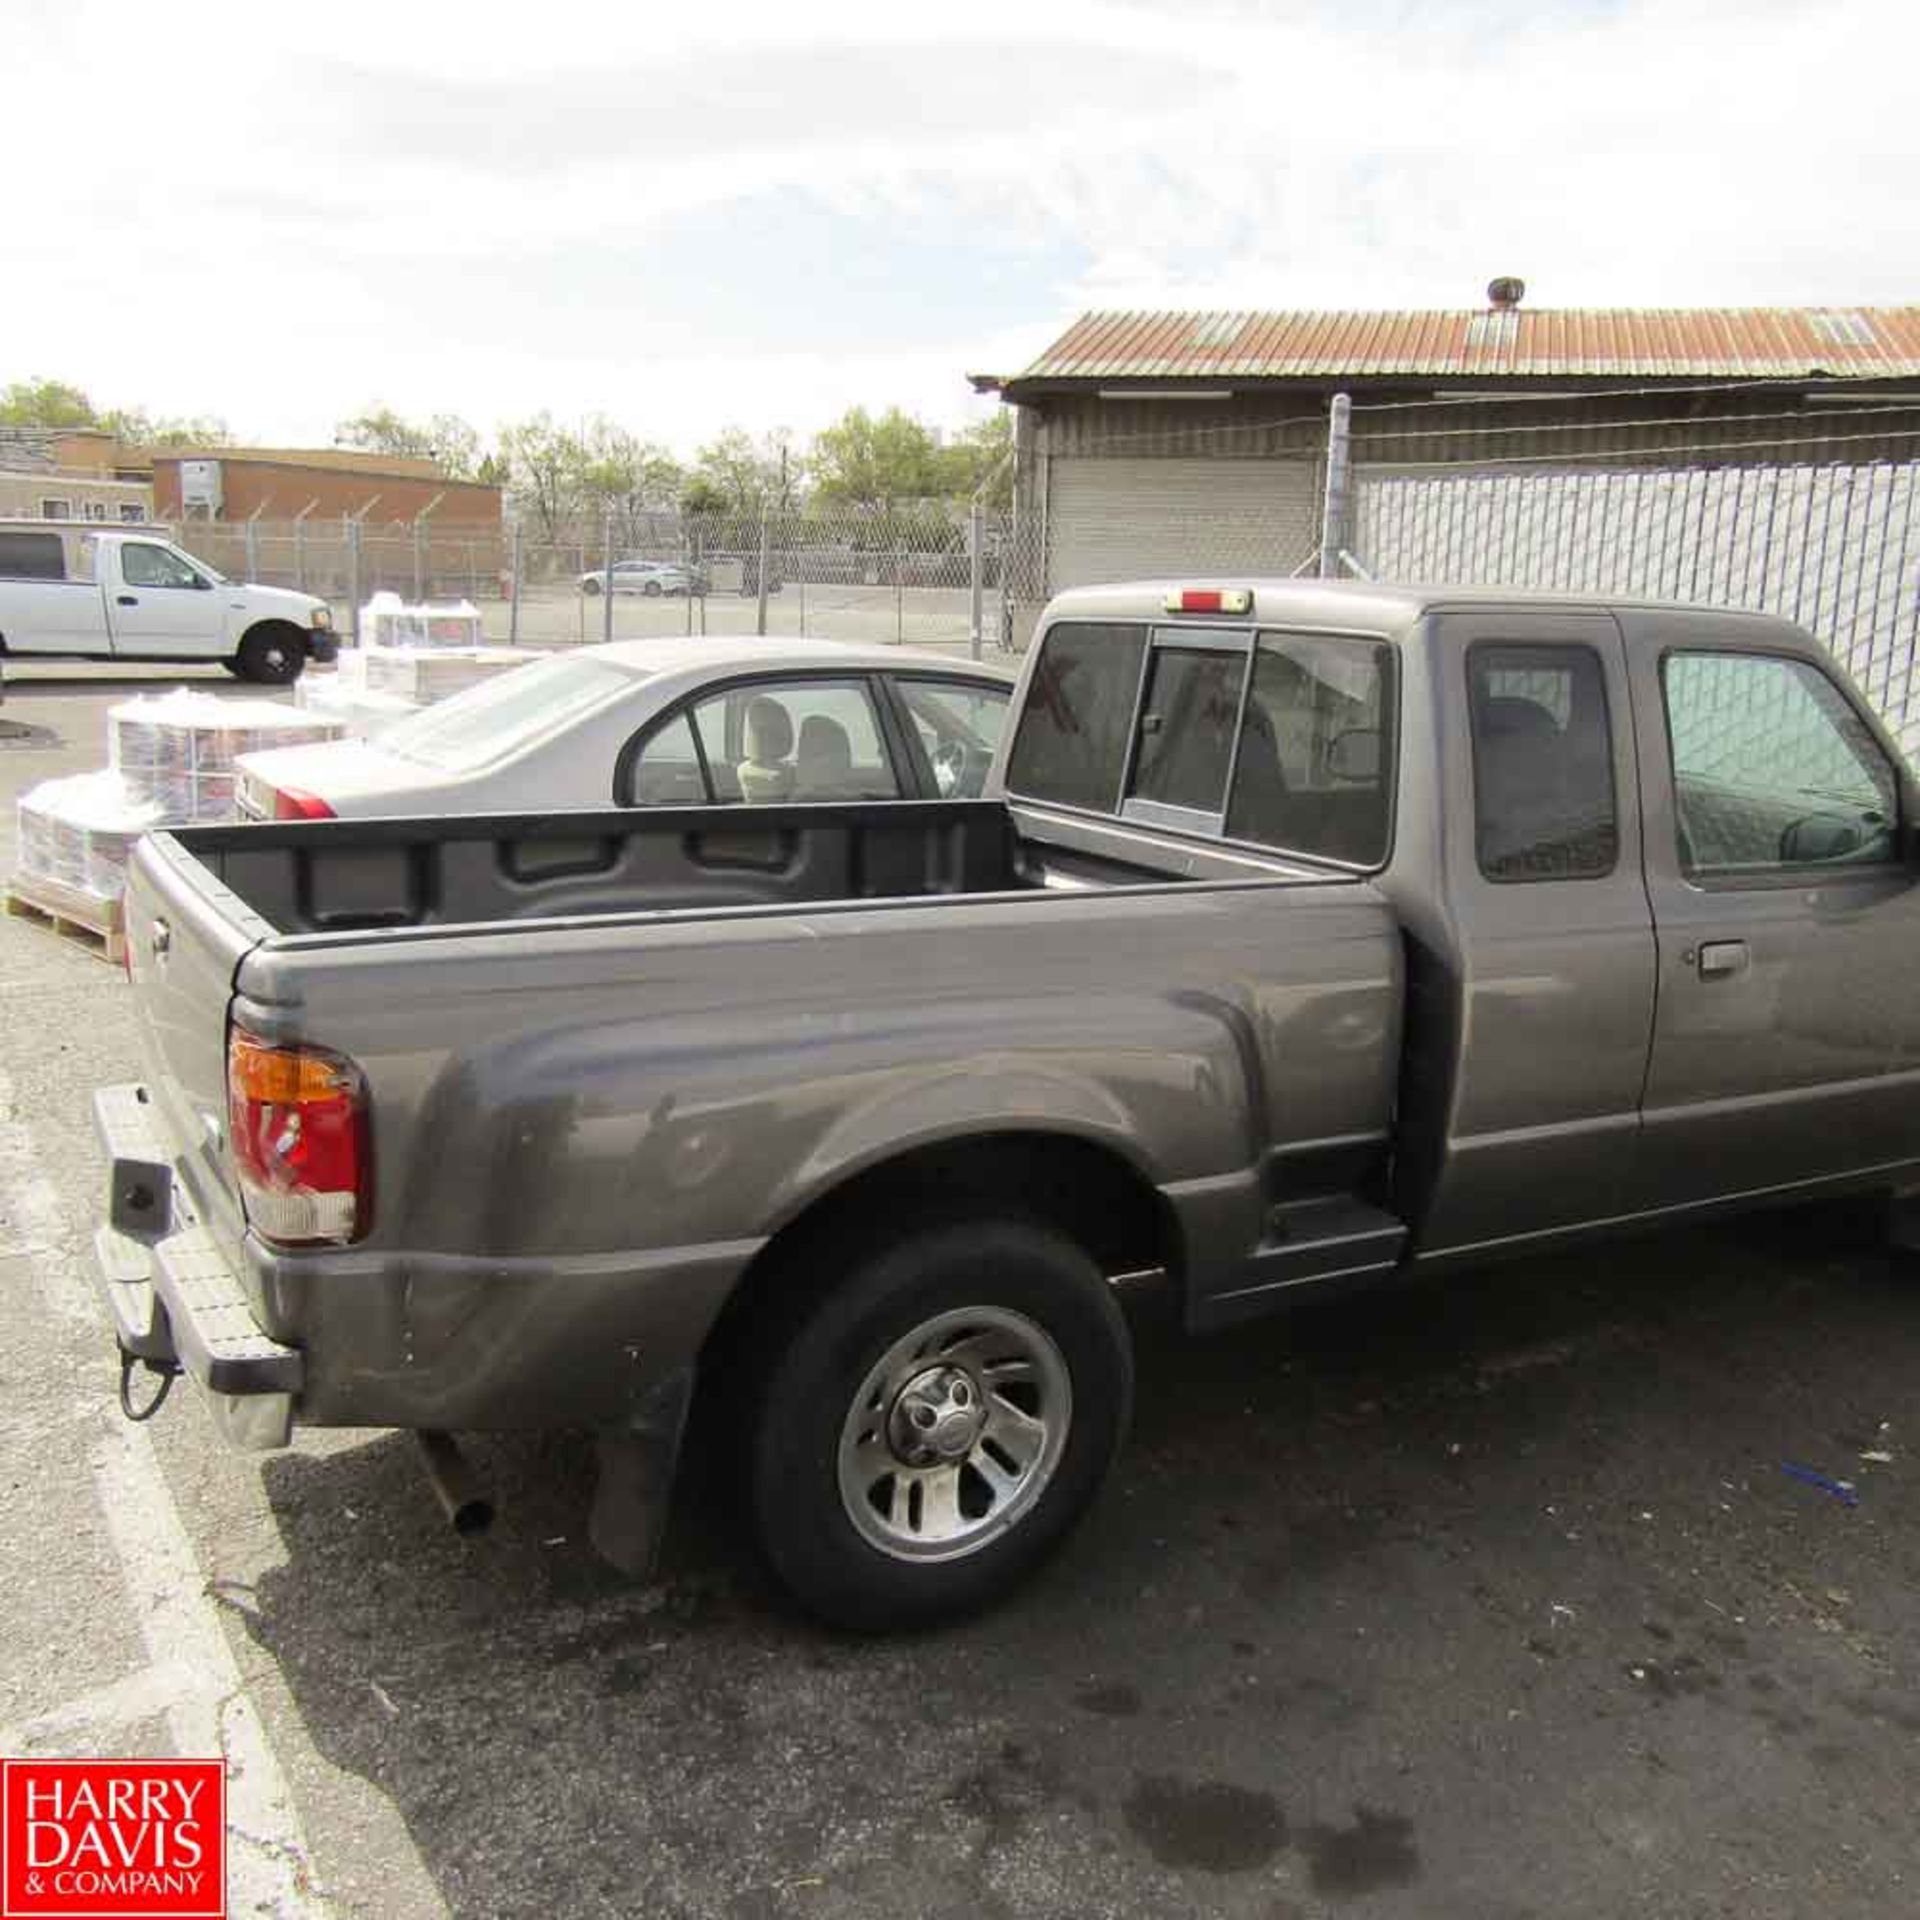 Ford Ranger XLT Pickup Truck, VIN # 1FTYRI4U6WPB32868, with 3.0 L Gas Engine and Automatic - Image 4 of 5